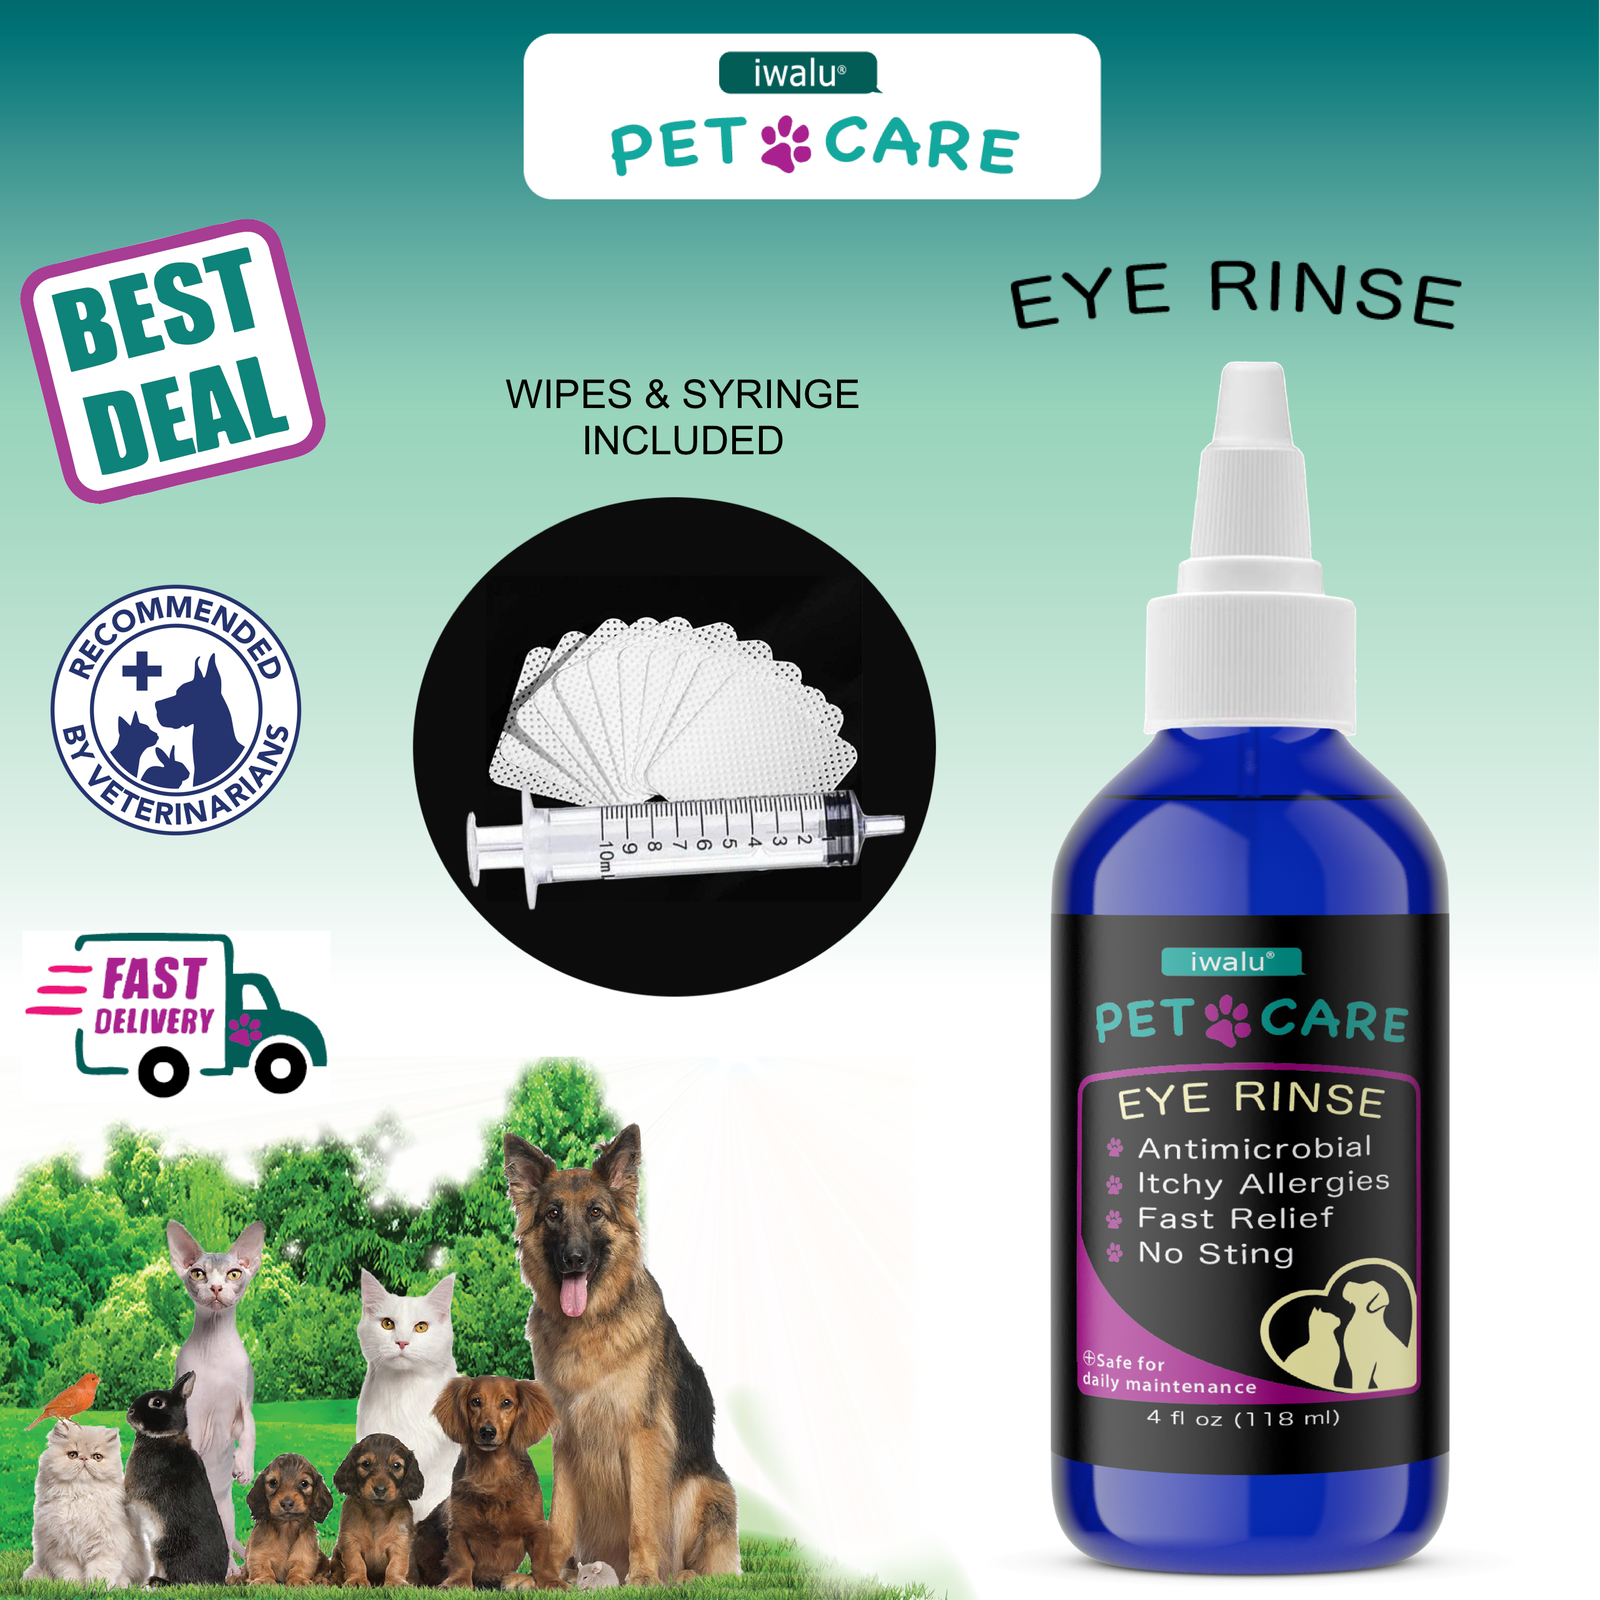 Dogs Soothing Healing Ophthalmic Eye Ointment for Animals Pet Cats Horse  4oz 850037971015 | eBay